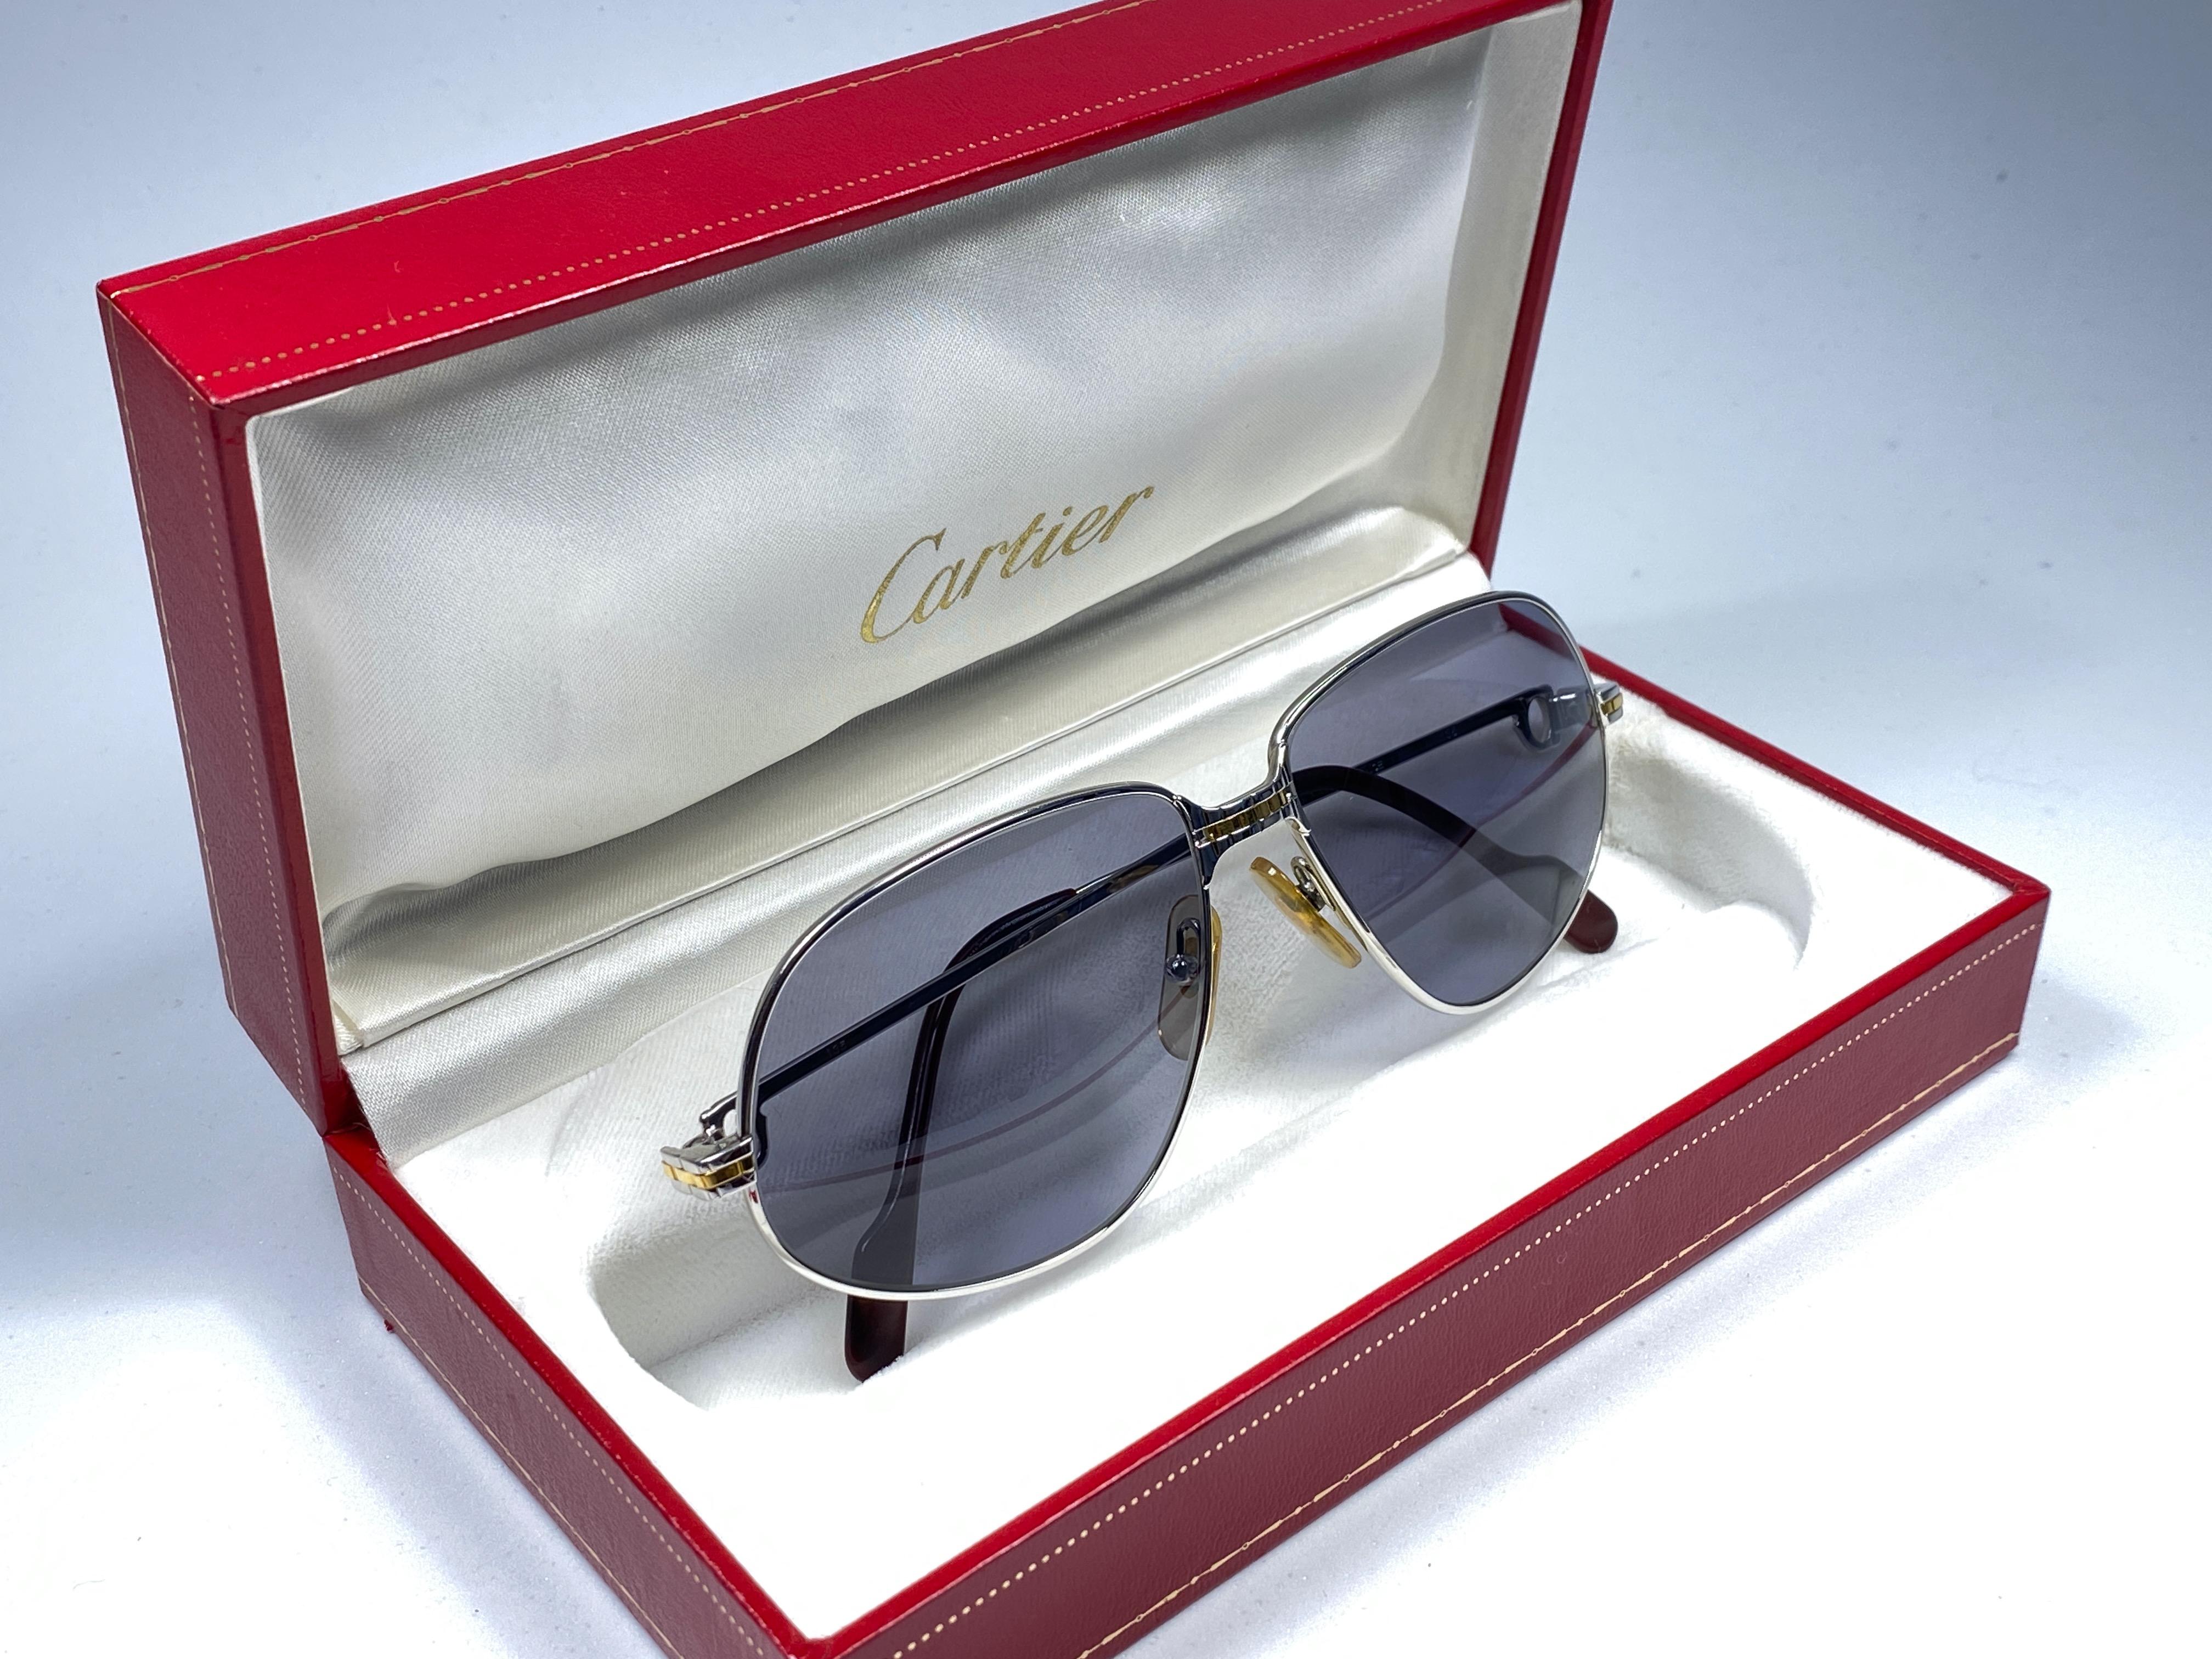 New 1988 Cartier Panthere sunglasses with grey (uv protection) lenses.  
Frame is with the front and sides in yellow and white gold. All hallmarks. burgundy ear paddles. 
Both arms sport the C from Cartier on the temple. 
These are like a pair of